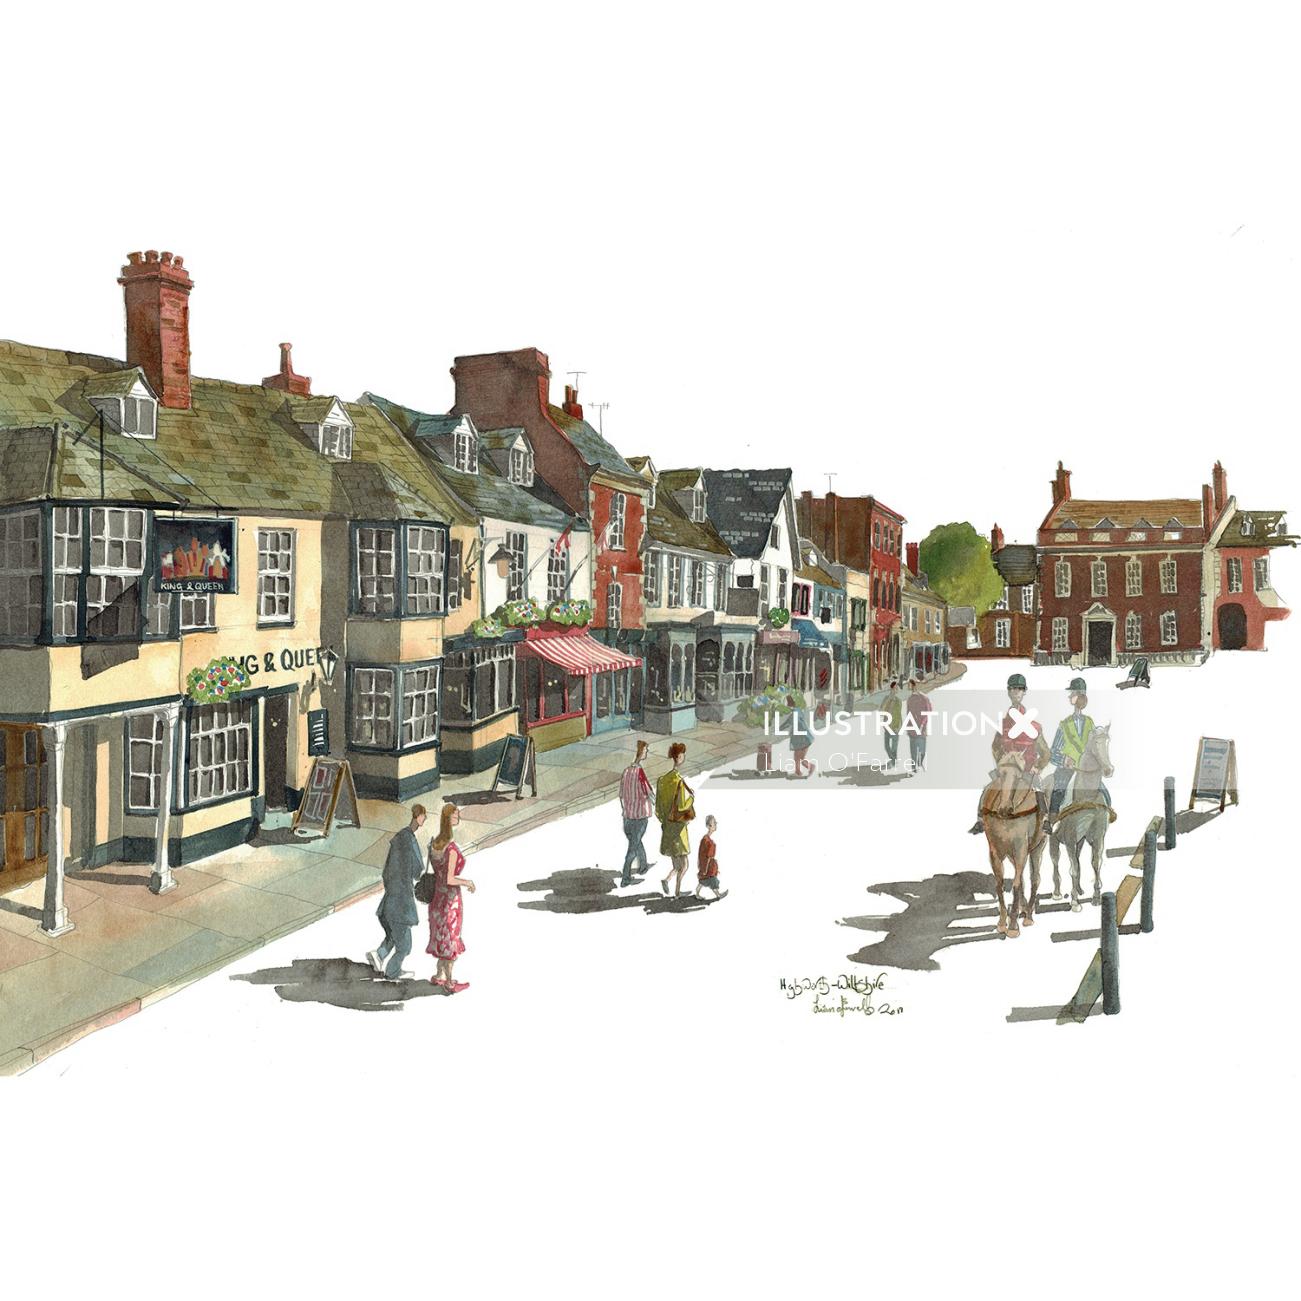 Painting of a Highworth high Street in Wiltshire, UK